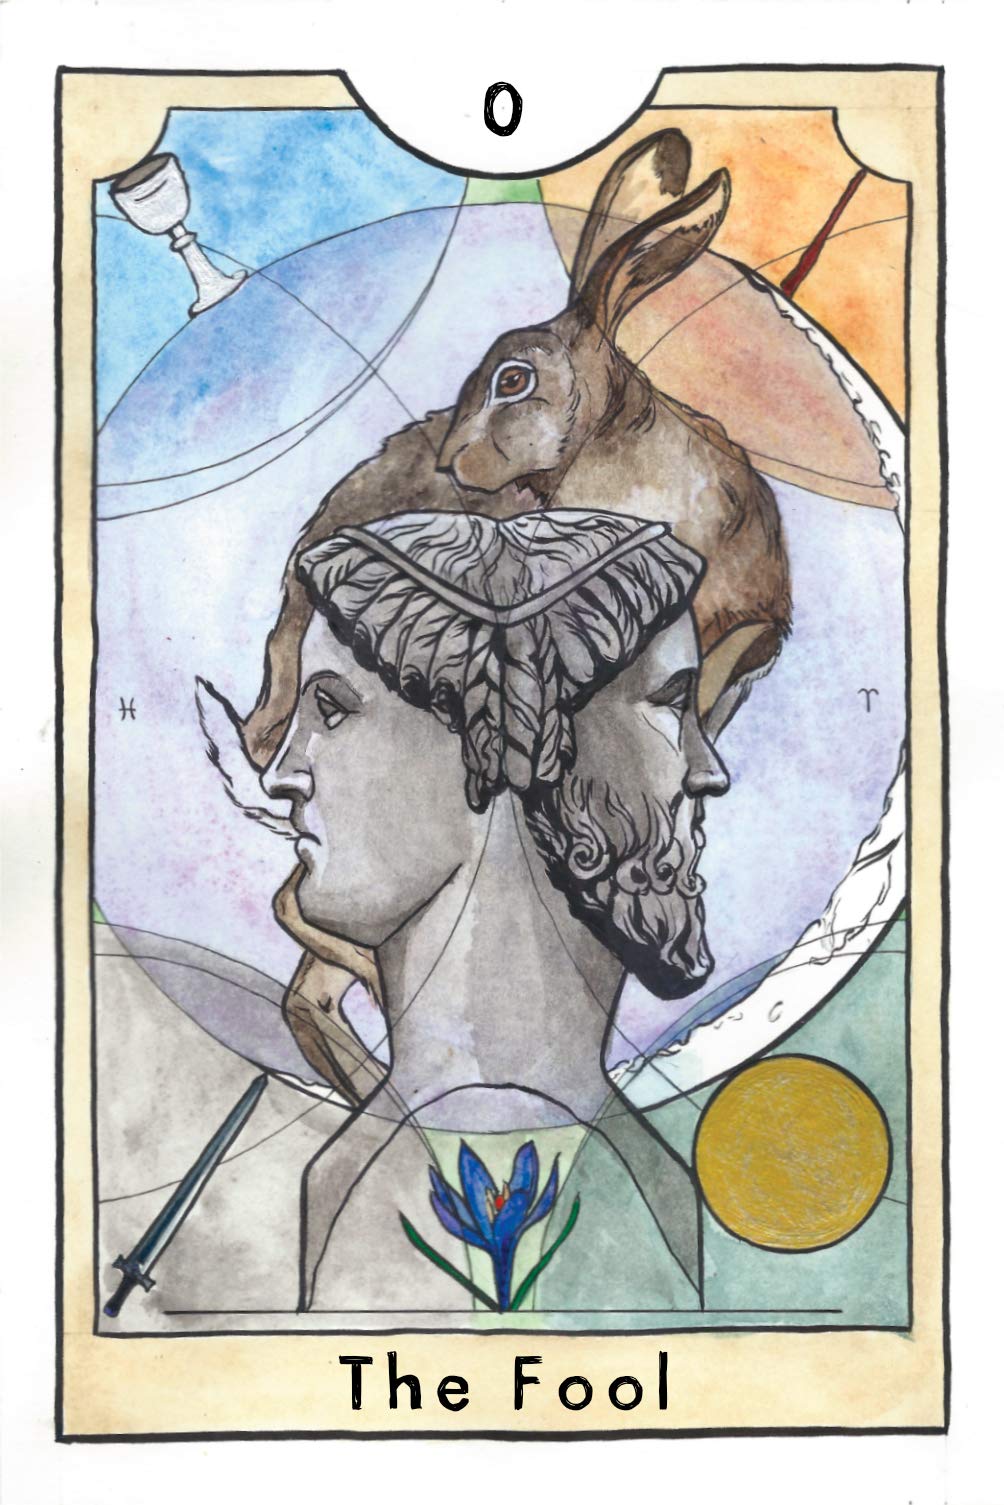 The New Chapter Tarot; Kathryn Briggs